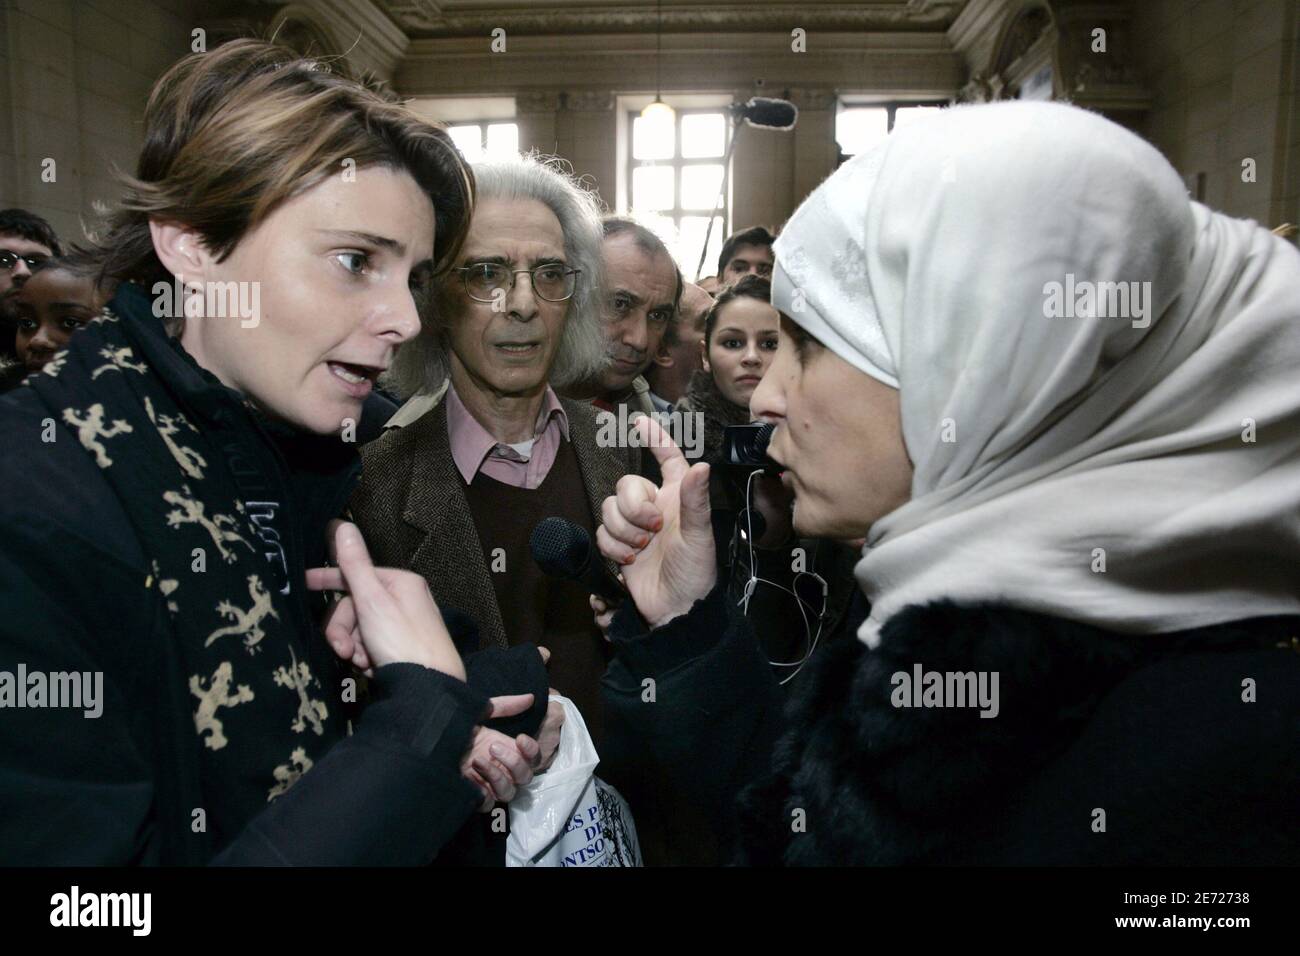 Charlie Hebdo's journalist Caroline Fourest at the Court of Paris during the lawsuit against Charlie Hebdo, French satirical weekly magazine which printed cartoons of the Prophet Muhammad, in Paris, France on February 8, 2007. Photo by Thibault Camus/ABACAPRESS Stock Photo